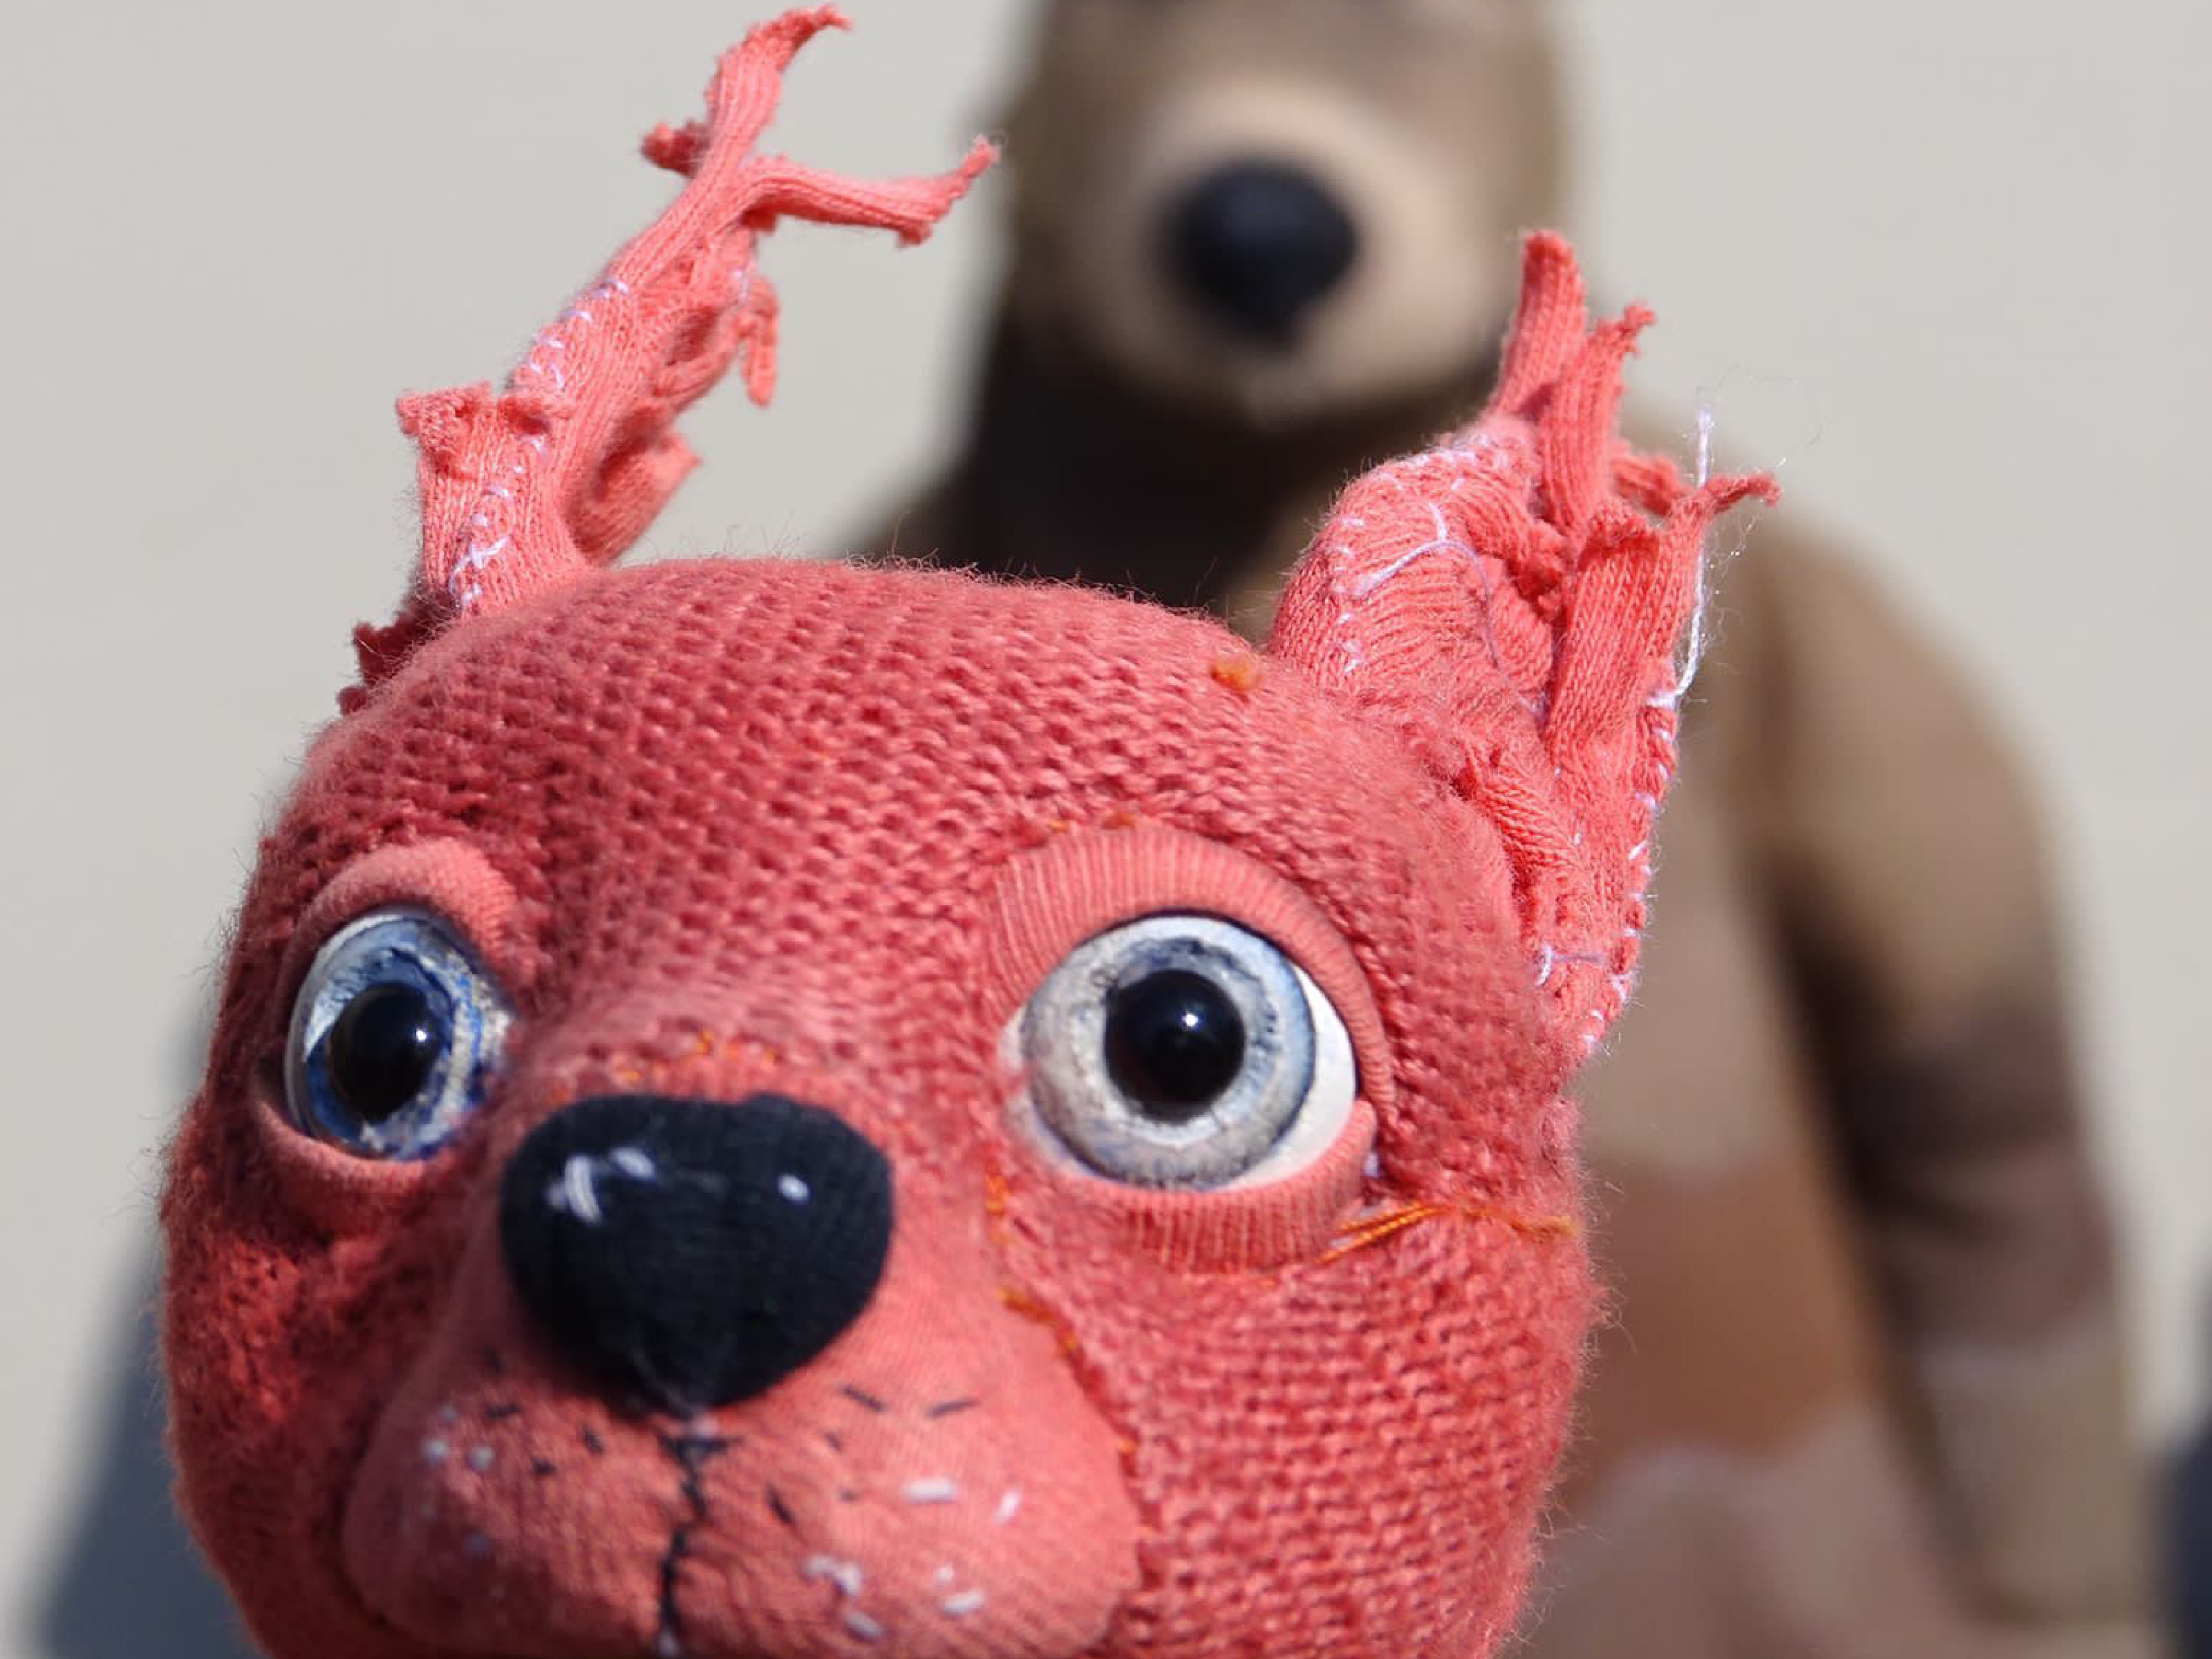 The puppet of a stuffed squirrel stands close to the camera lens. The squirrel has blue eyes and embroidered whiskers. The large puppet of a bear stands in the background.